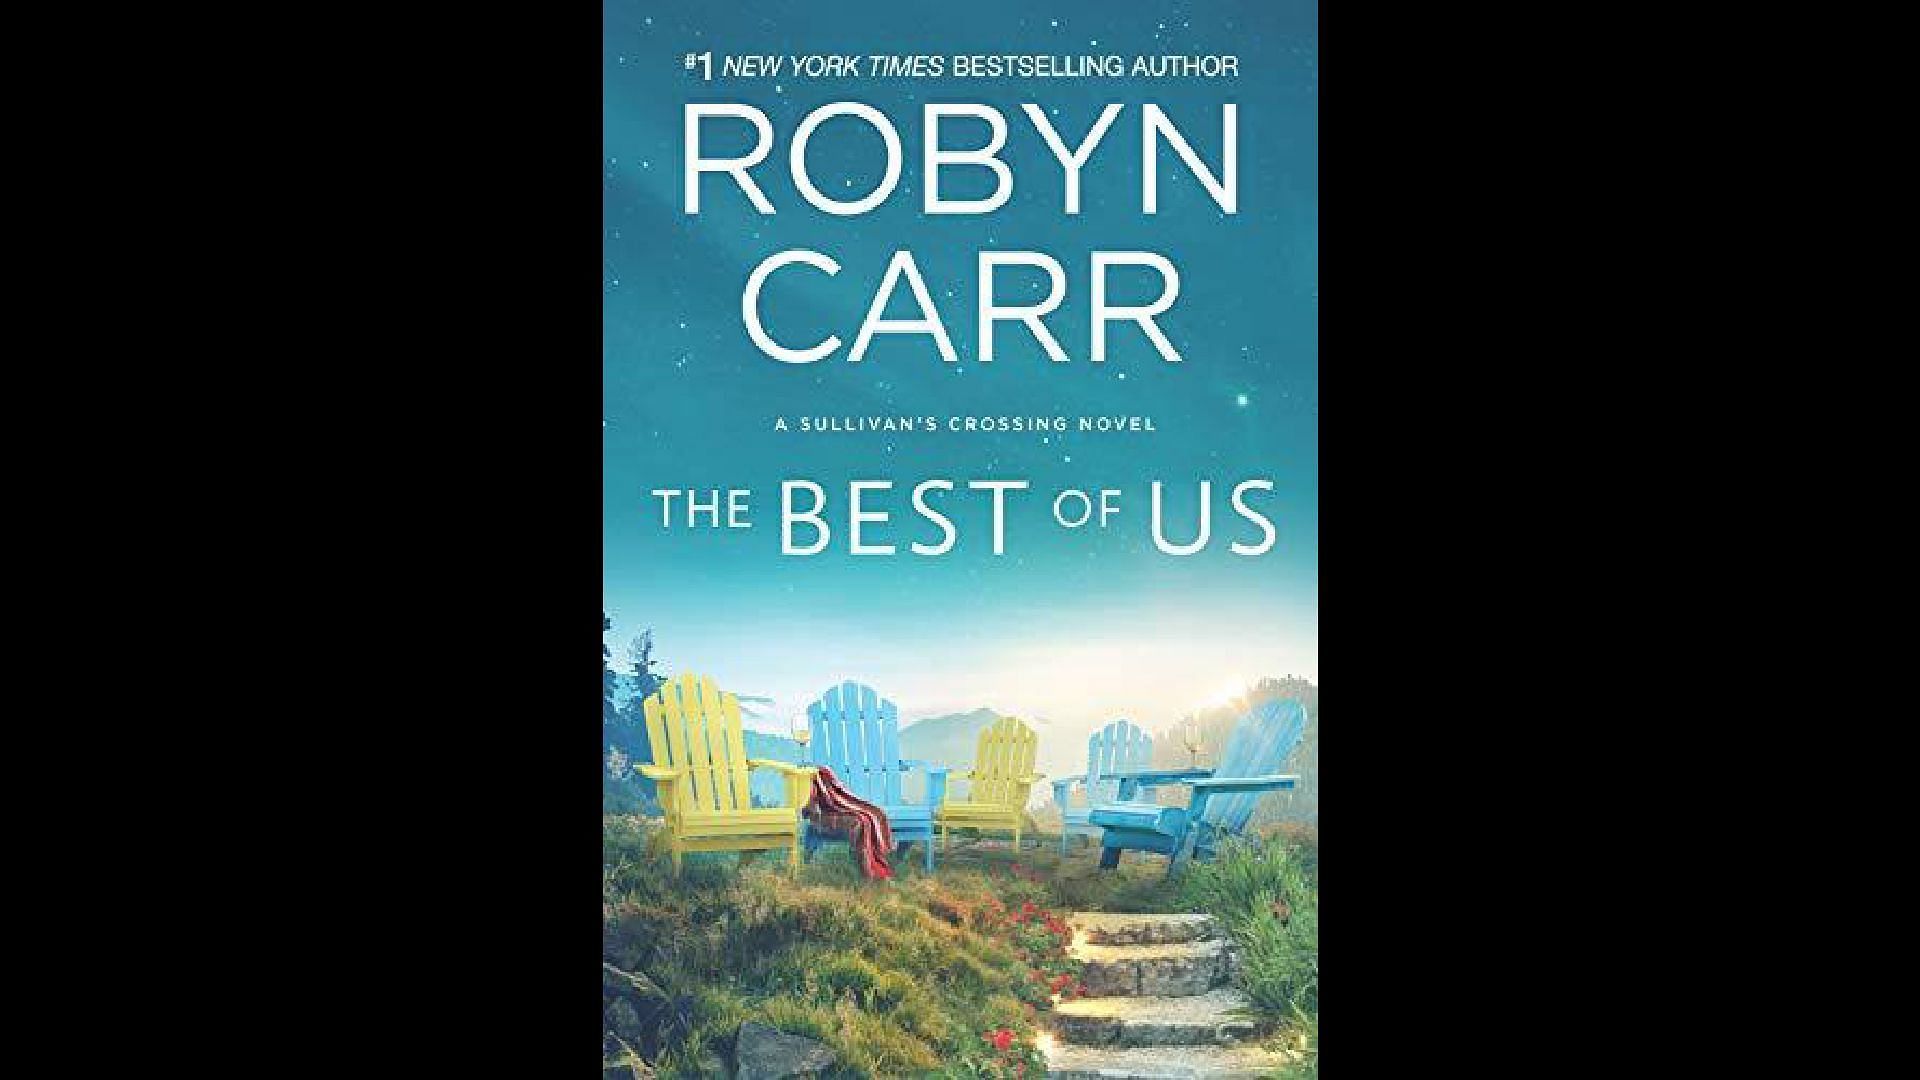 Robyn Carr&#039;s The Best of Us (Image via Goodreads)